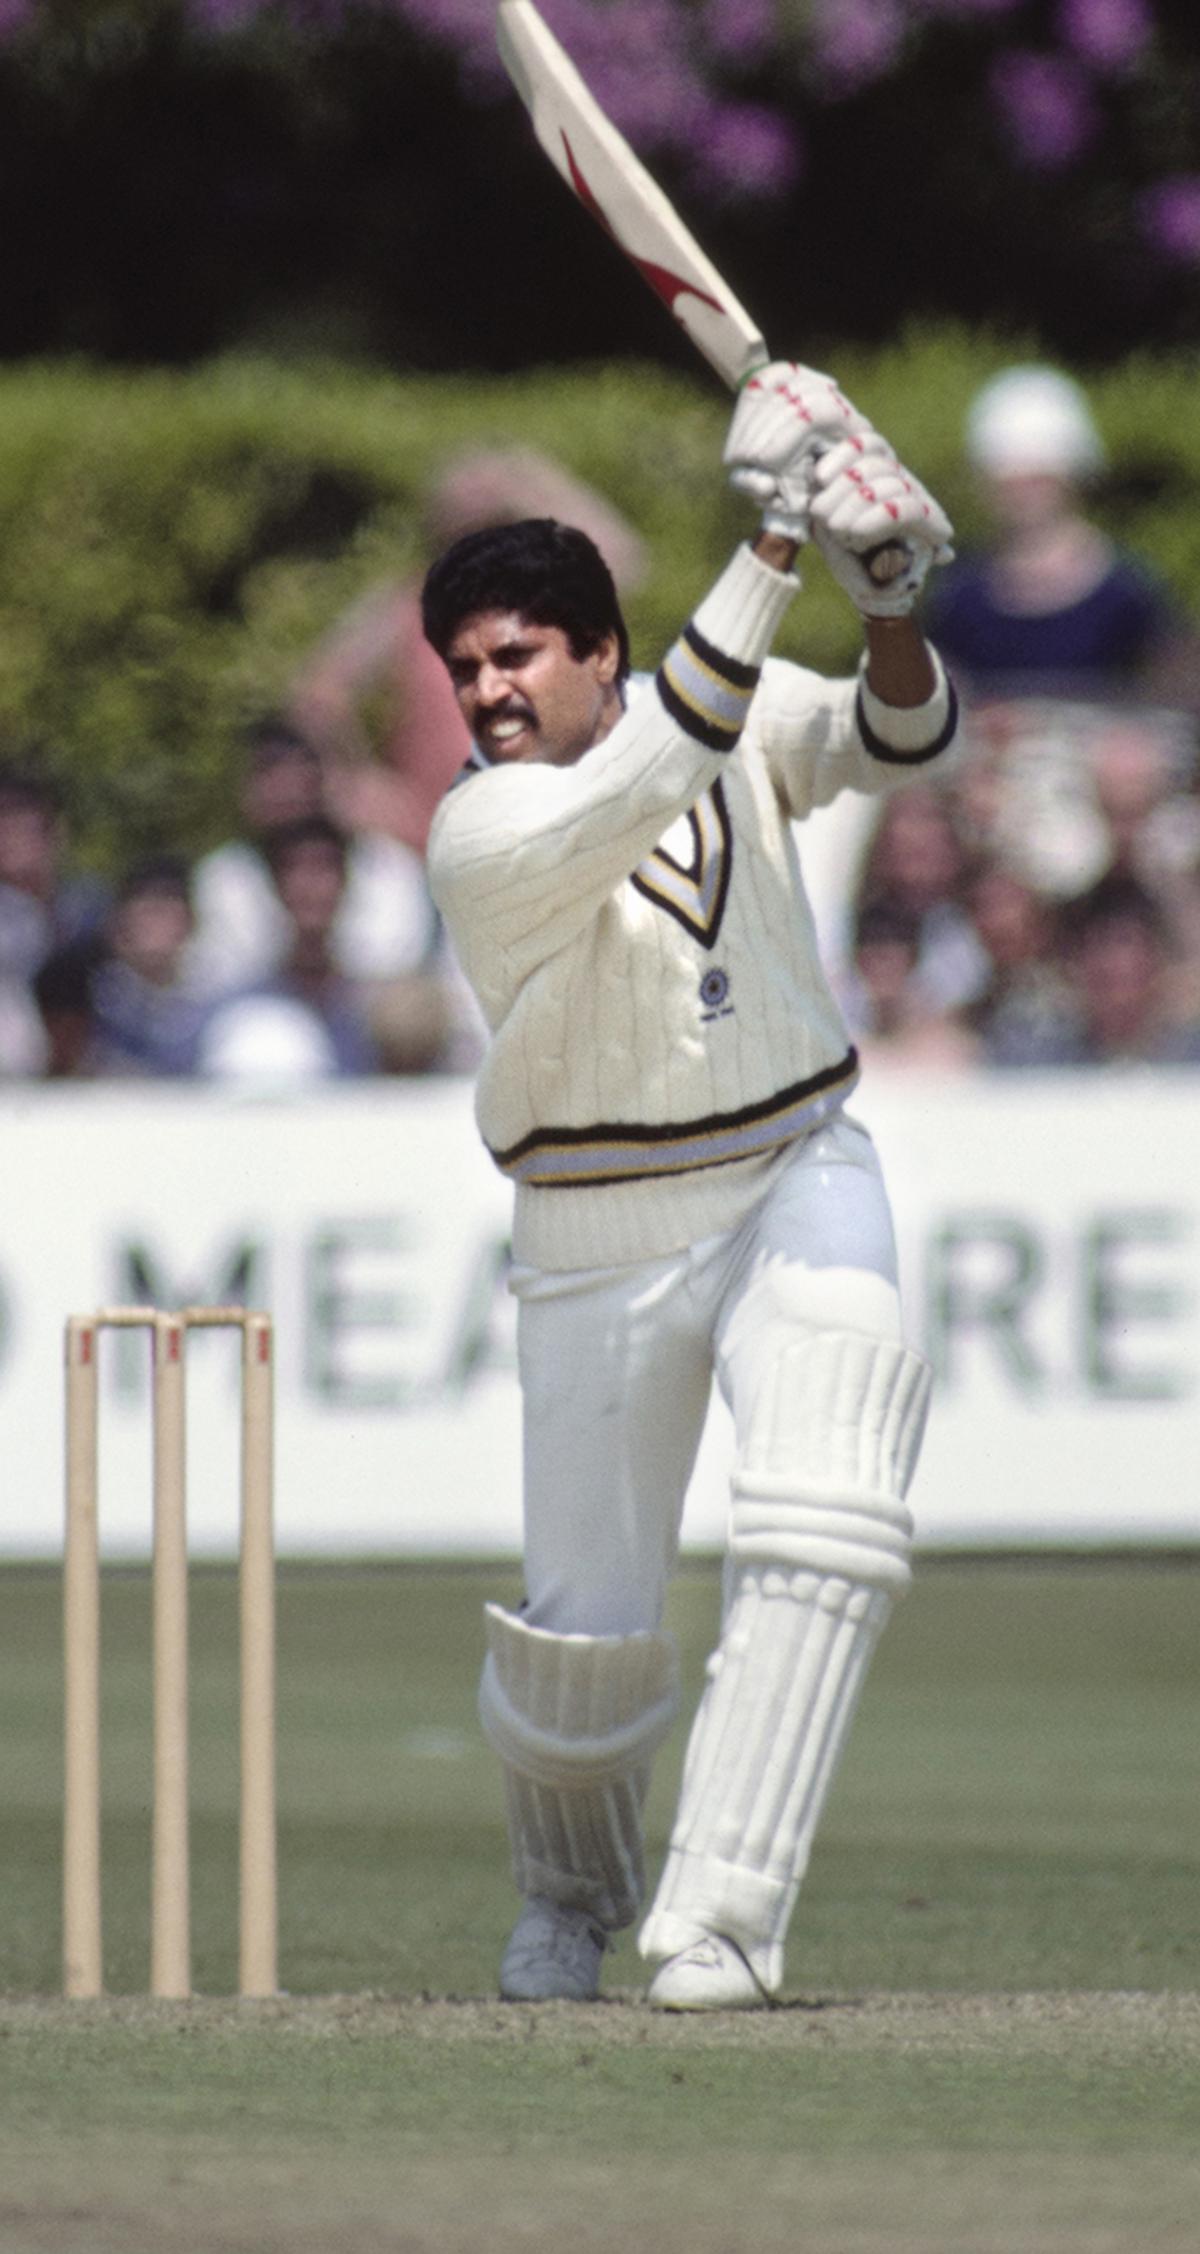 TUNBRIDGE WELLS, ENGLAND - JUNE 18: India batsman Kapil Dev hits out during his innings of 175 not out during the 1983 Cricket World Cup finals Match between India and Zimbabwe at Tunbridge Wells on June 18th, 1983 in Tunbridge Wells, England. 